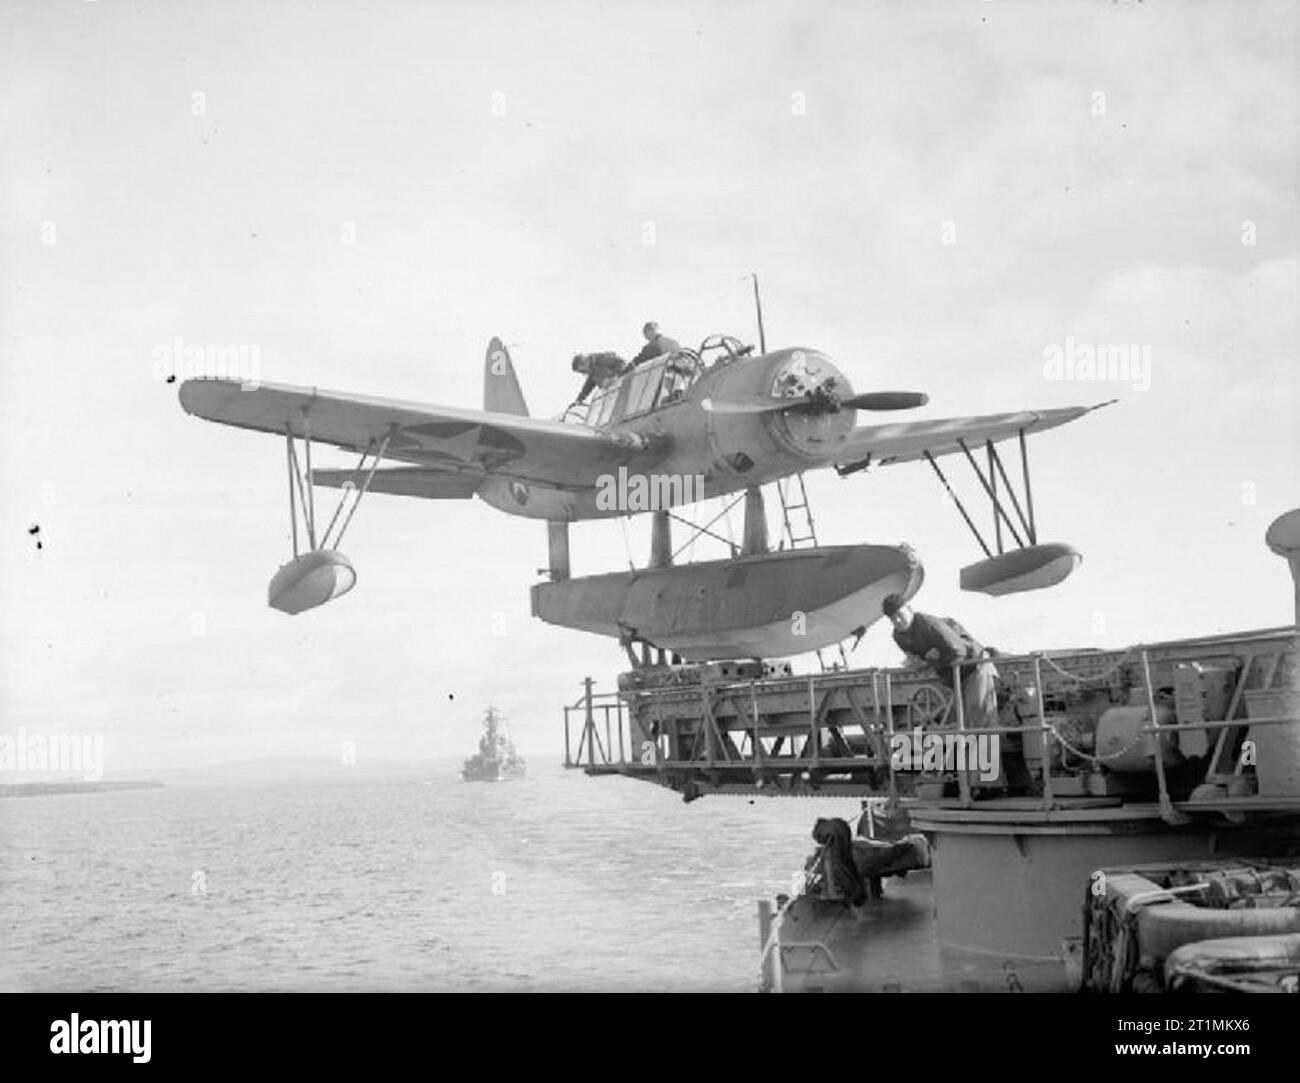 The Royal Navy during the Second World War The observer entering the Vought-Sikorsky Kingfisher aircraft on board USS SOUTH DAKOTA before a flight at Scapa Flow whilst the ship is operating with elements of the Home Fleet. The Kingfisher can operate from their ship while underway and be retrieved by the ship's crane without stopping the ship. The aircraft is mounted on a catapult. Stock Photo